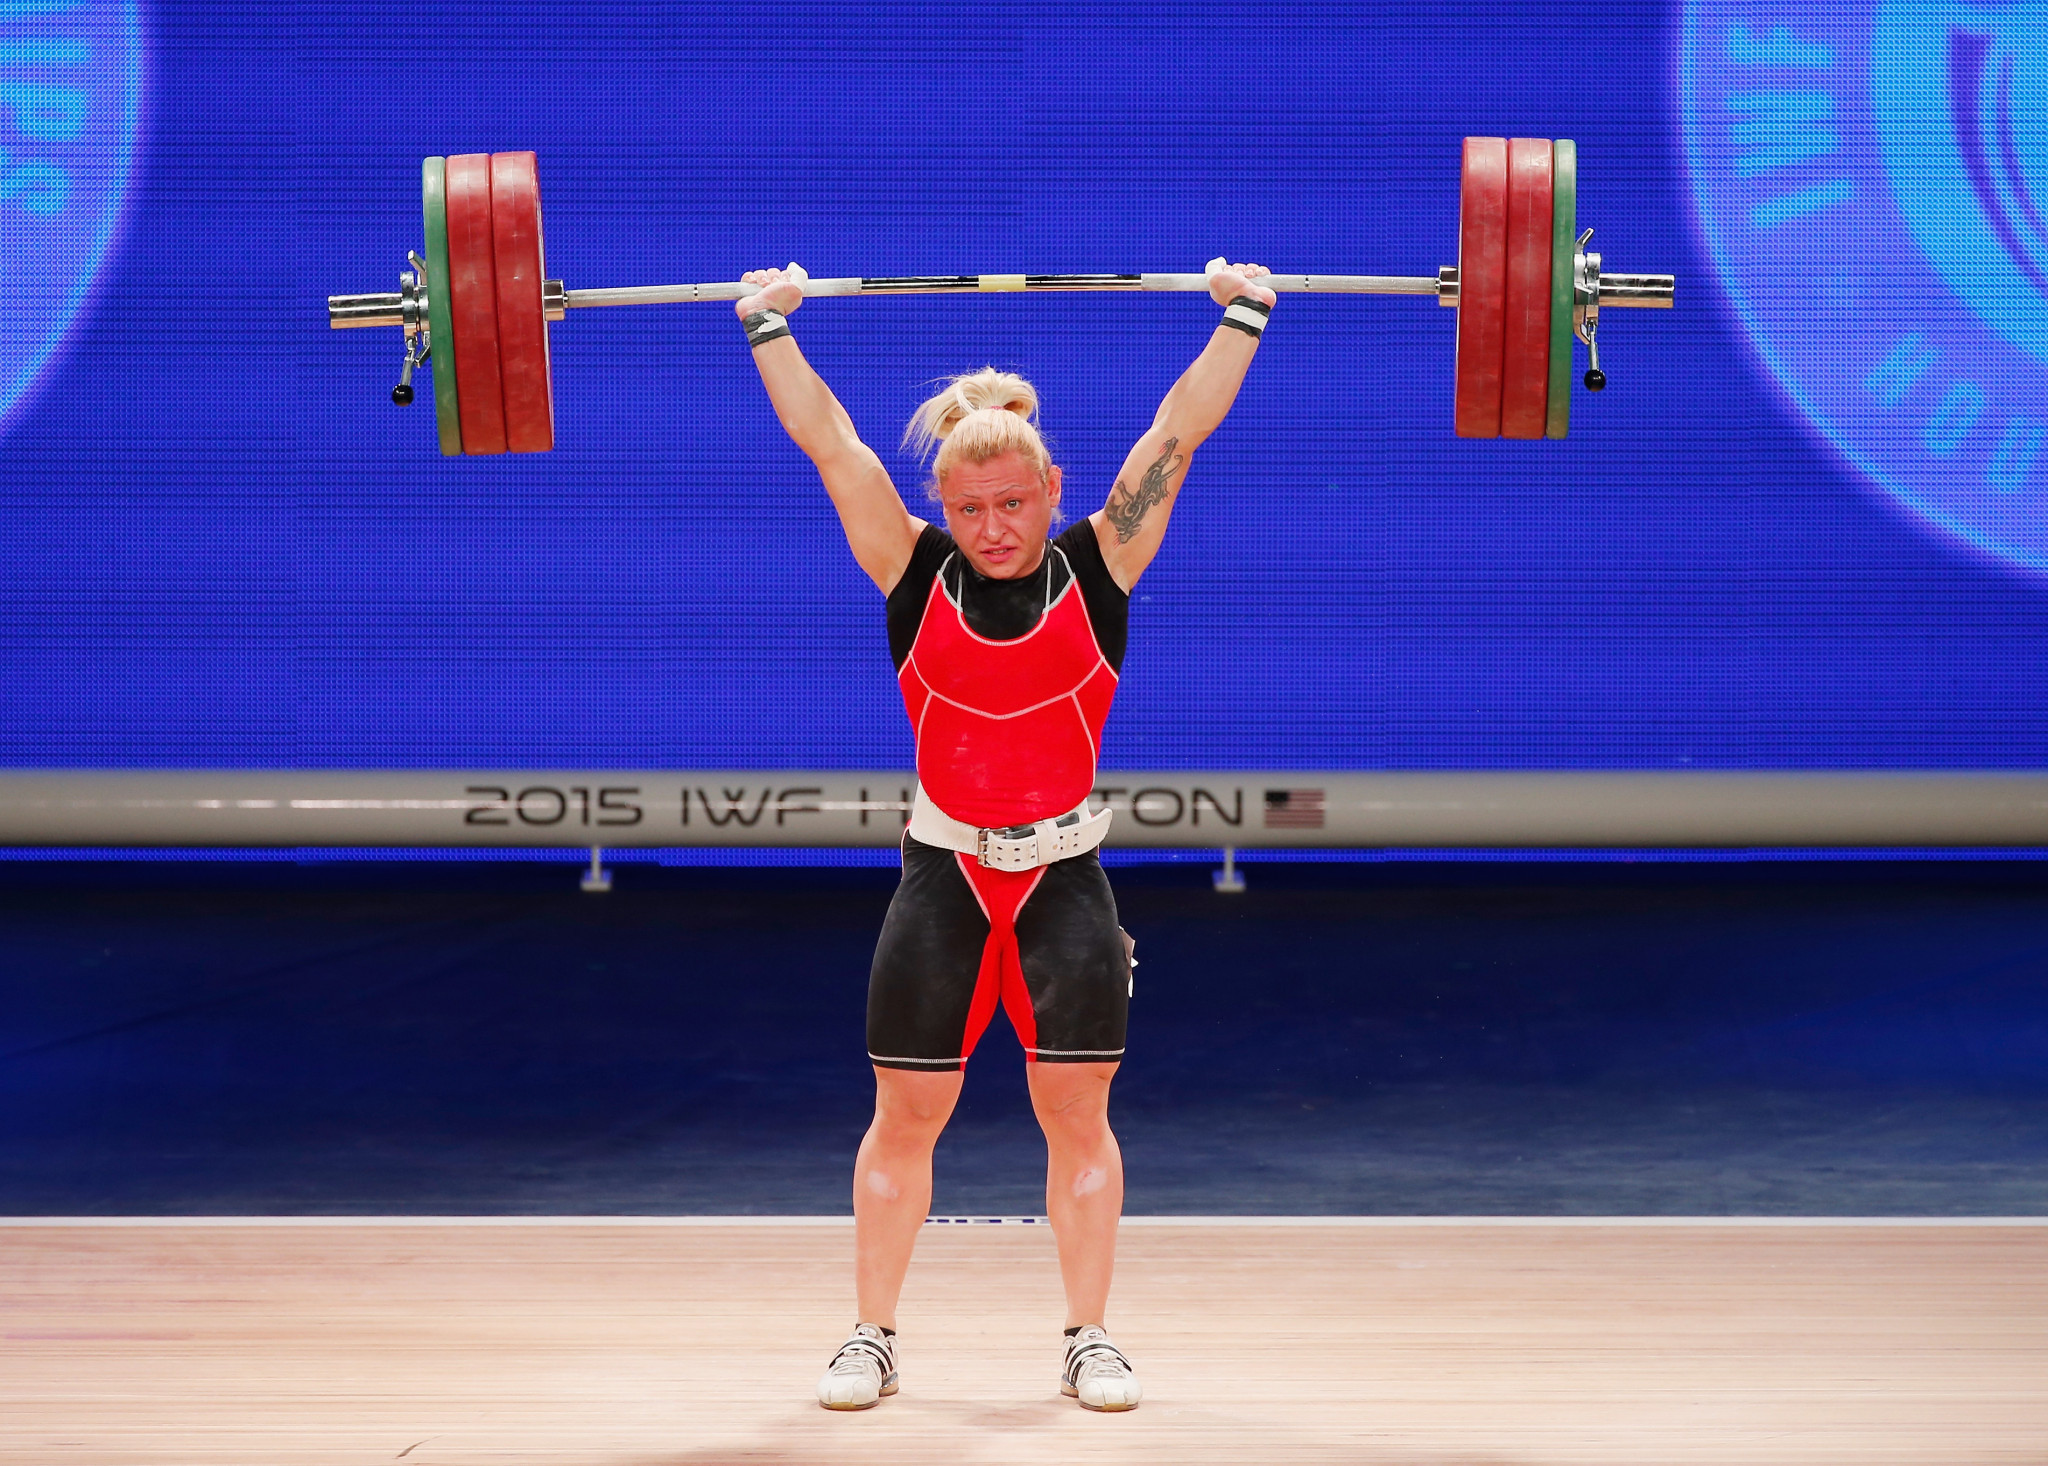 Kostova wins closely fought women’s 59kg category on third day of European Weightlifting Championships